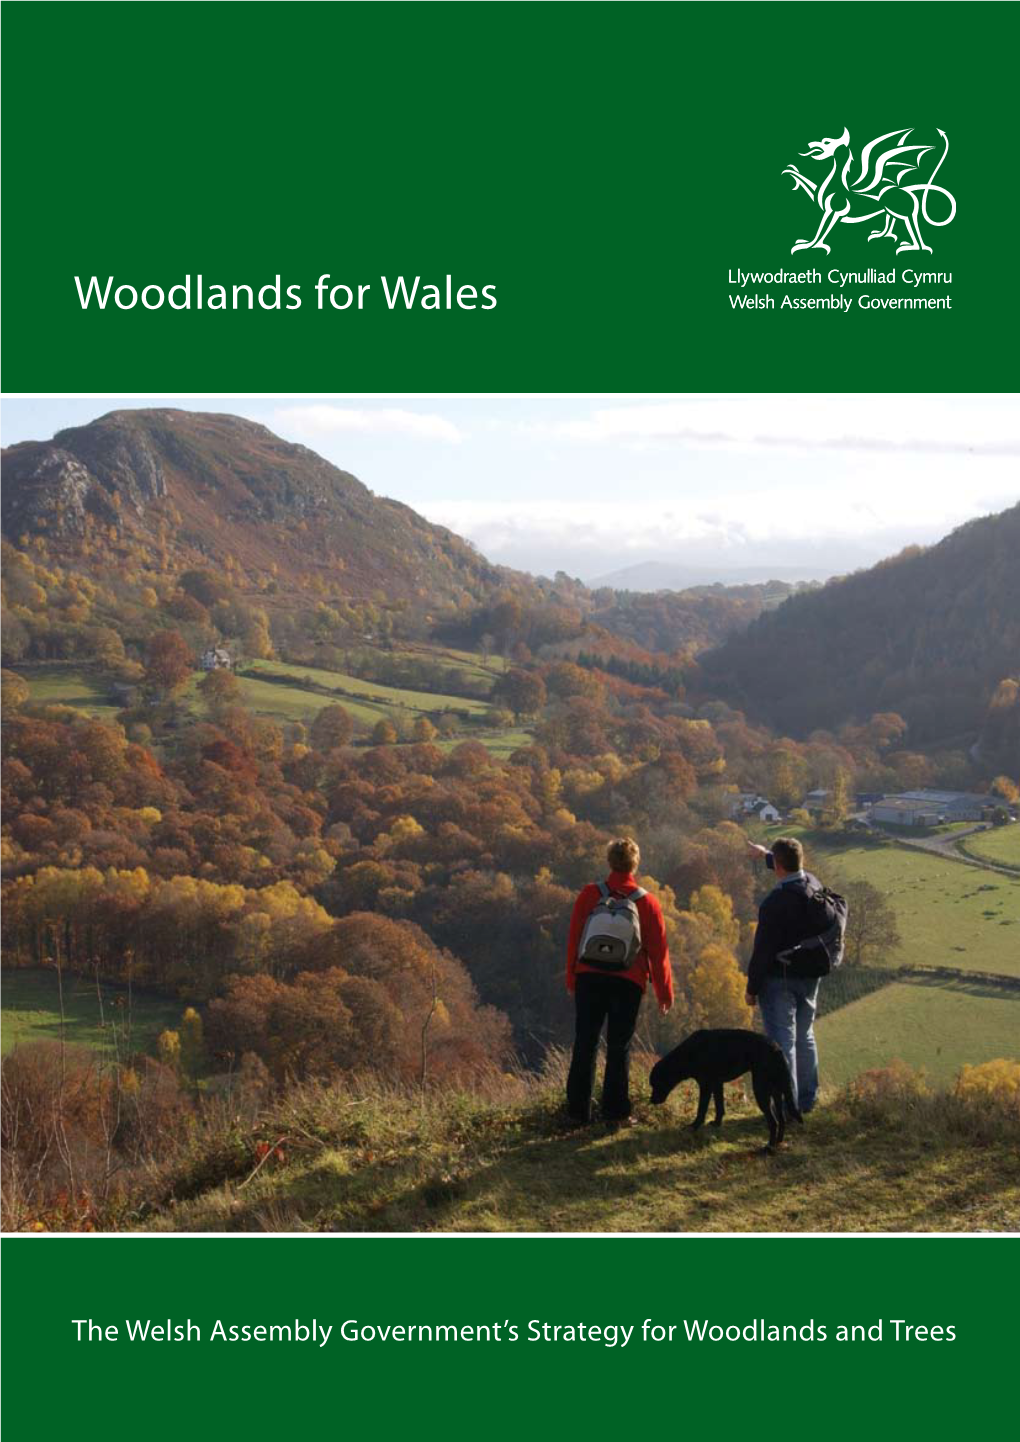 Welsh Assembly Government's Strategy for Woodlands and Trees